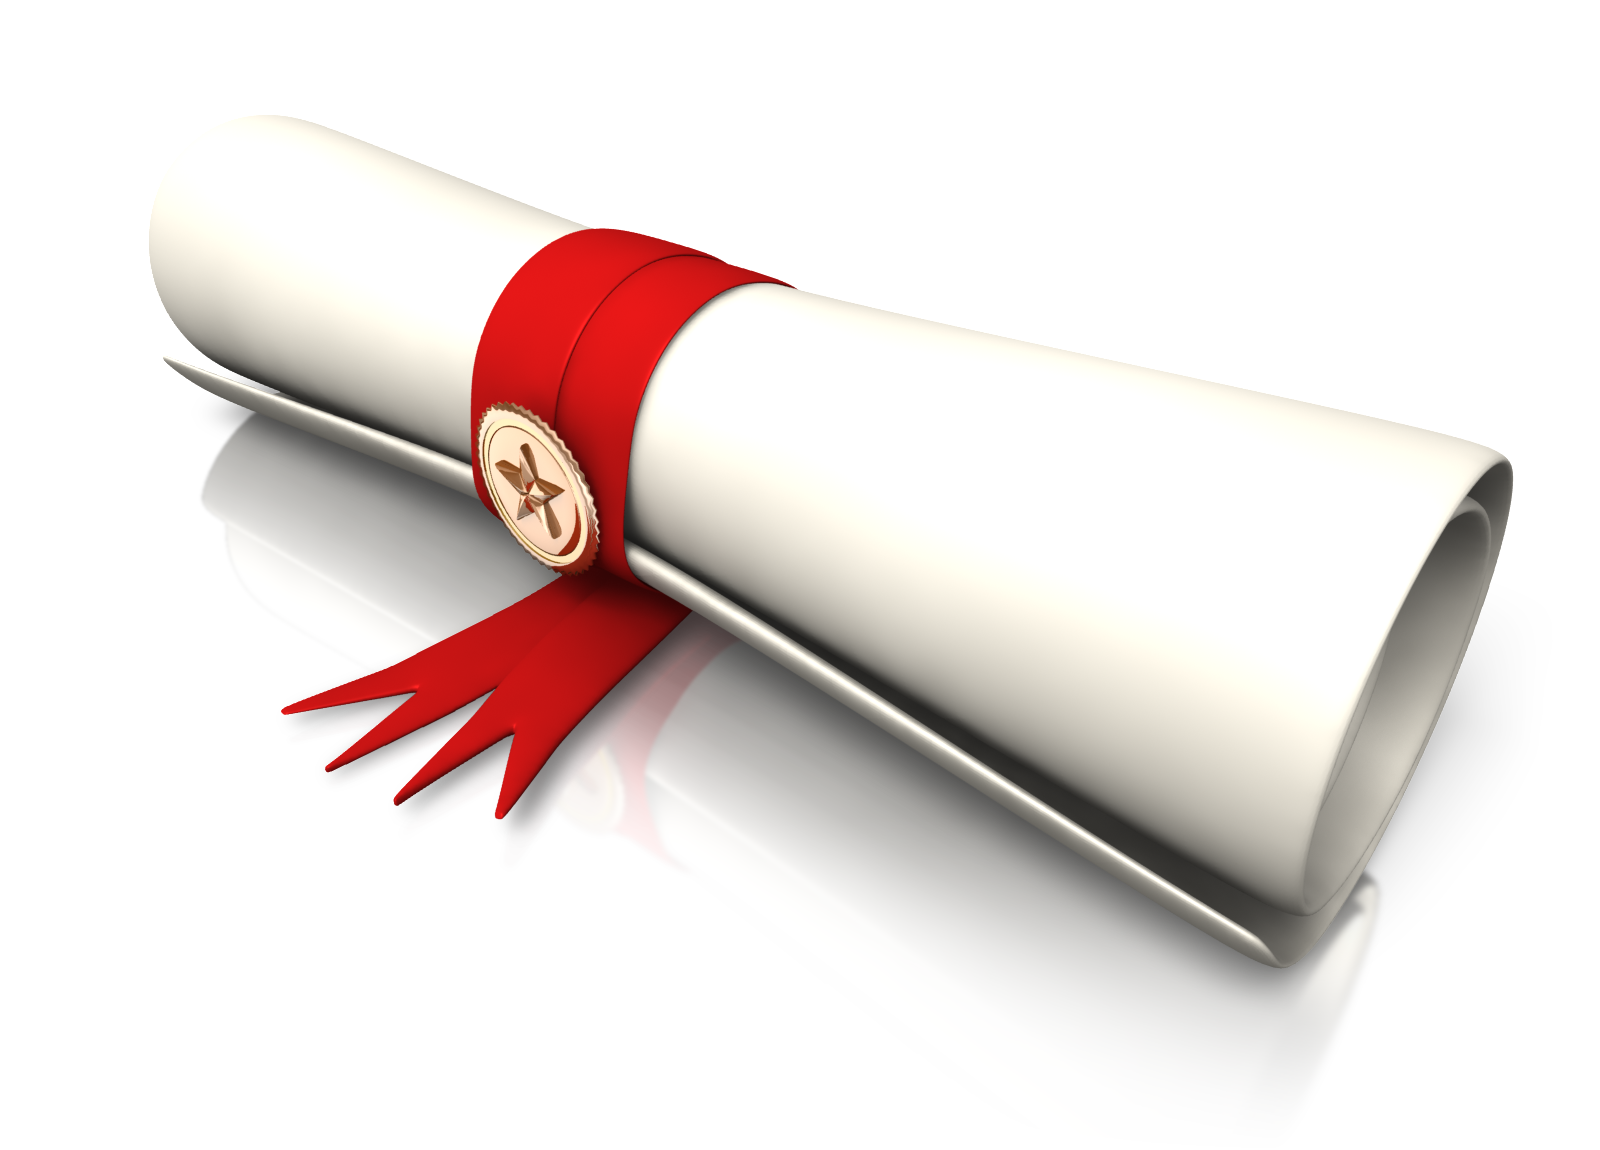 Download Scroll clipart diploma, Scroll diploma Transparent FREE ...